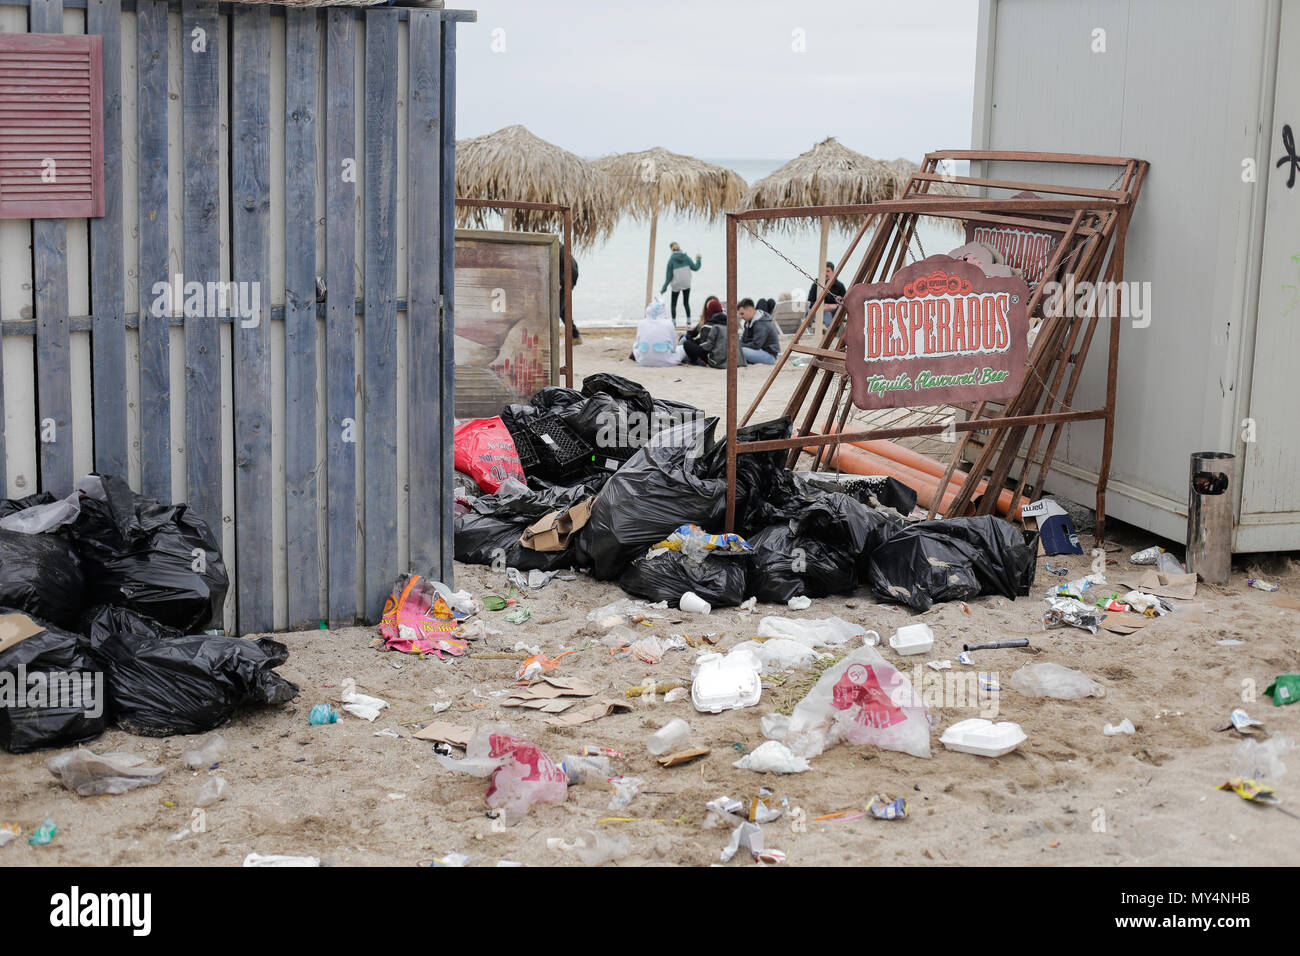 VAMA VECHE, ROMANIA - MAY 1, 2018: Garbage (especially empty bottles), after an all night party, early in the morning just before sunrise Stock Photo